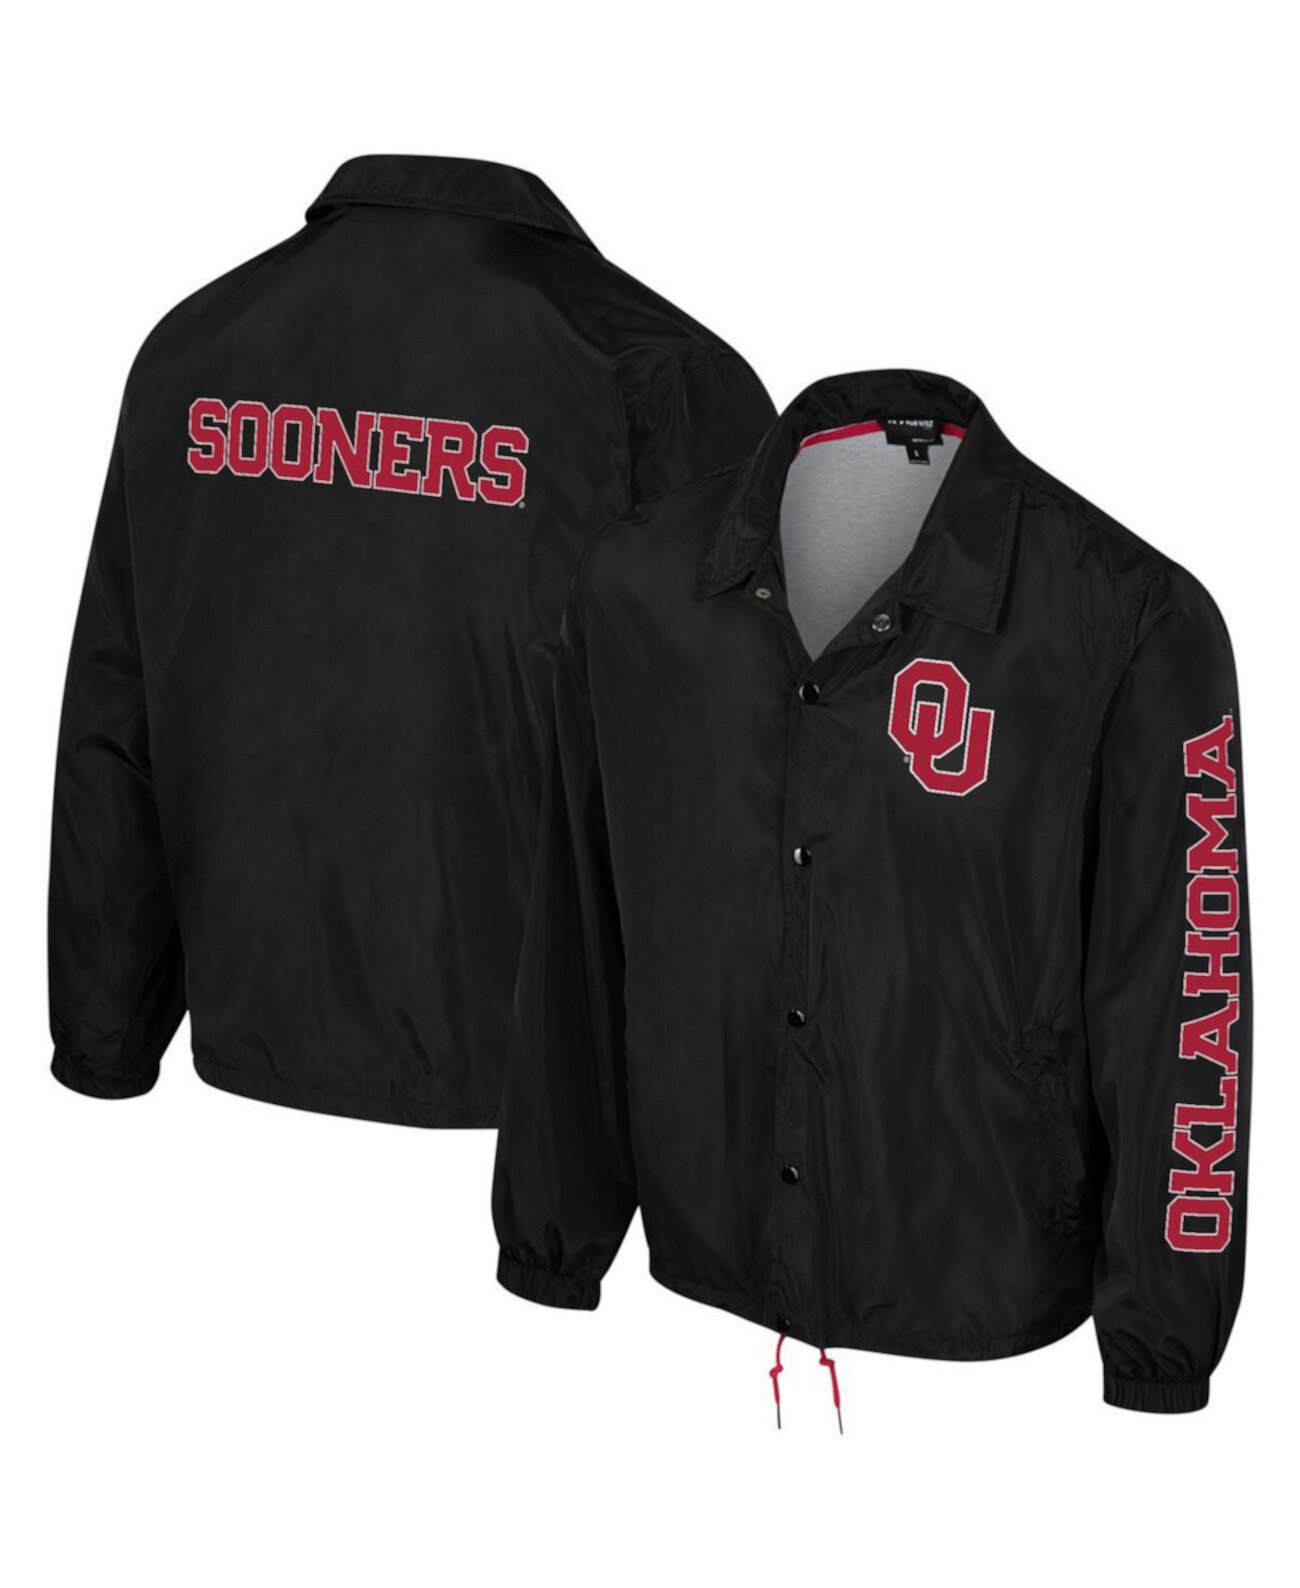 Men's and Women's Black Oklahoma Sooners Coaches Full-Snap Jacket The Wild Collective